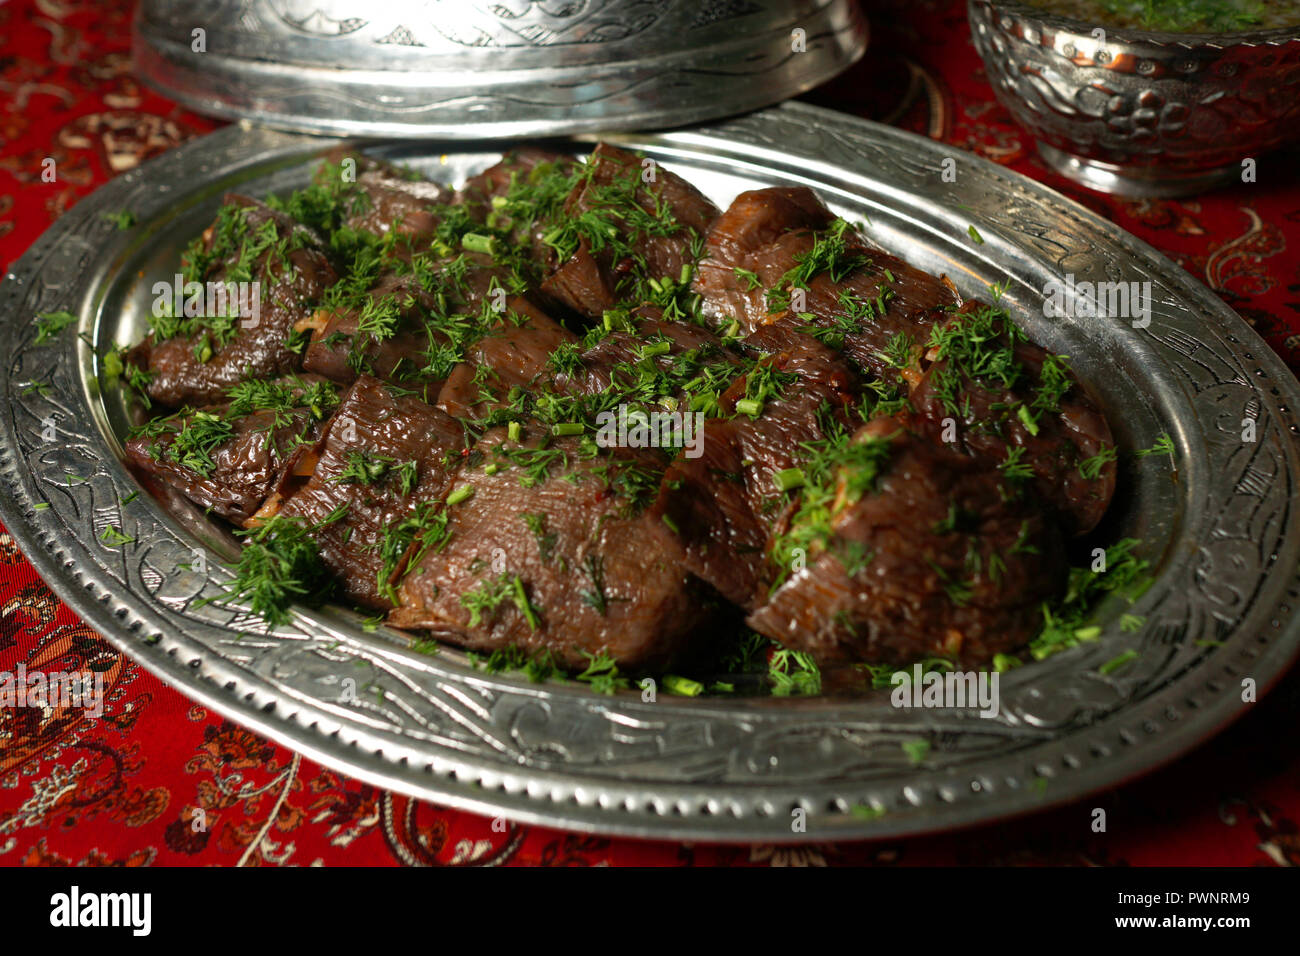 Stuffed eggplants from Turkish cuisine decorated with parsley presented in traditional copper plate and cap. Stock Photo